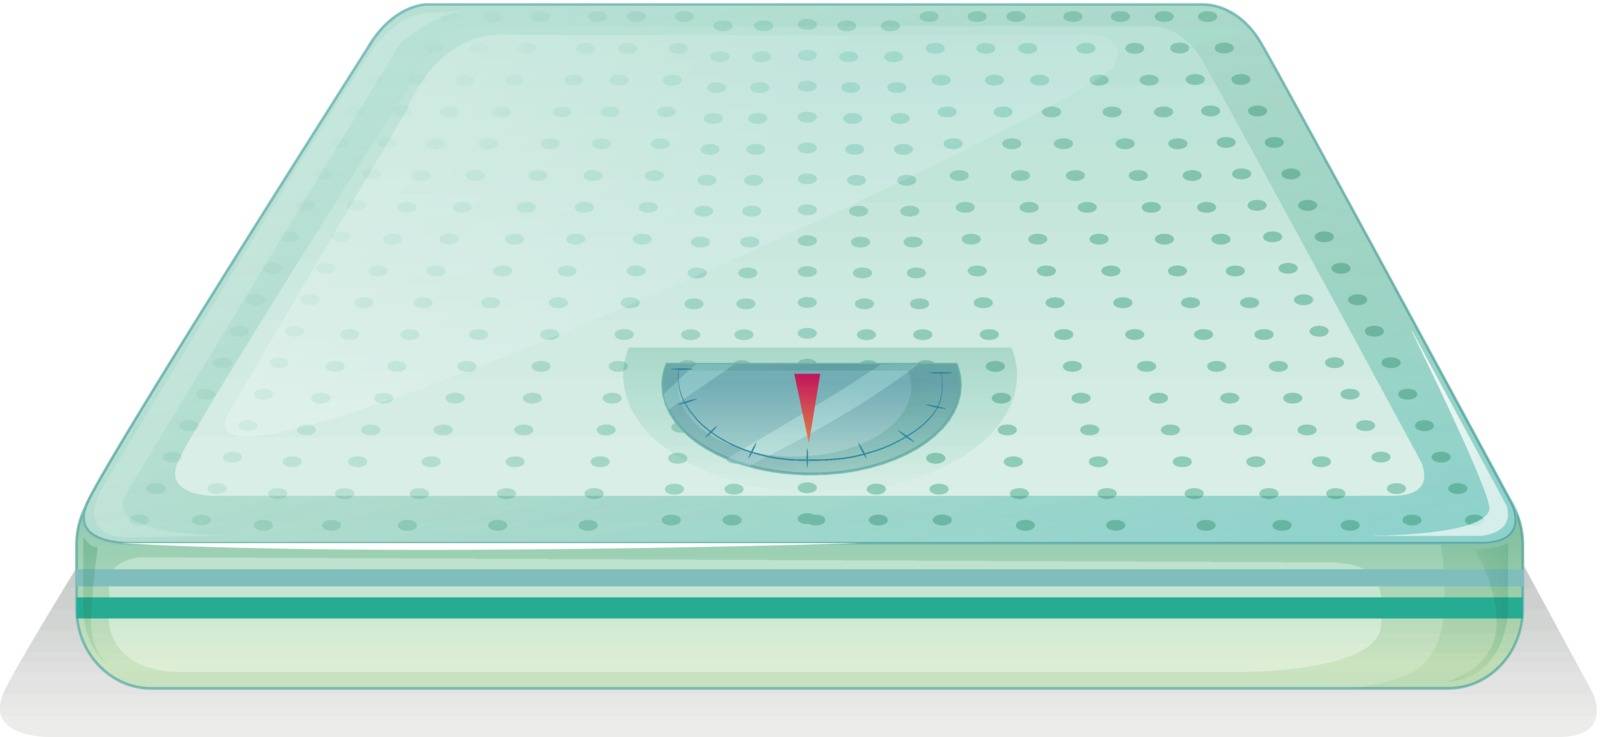 Illustration of a weighing scale on a white background